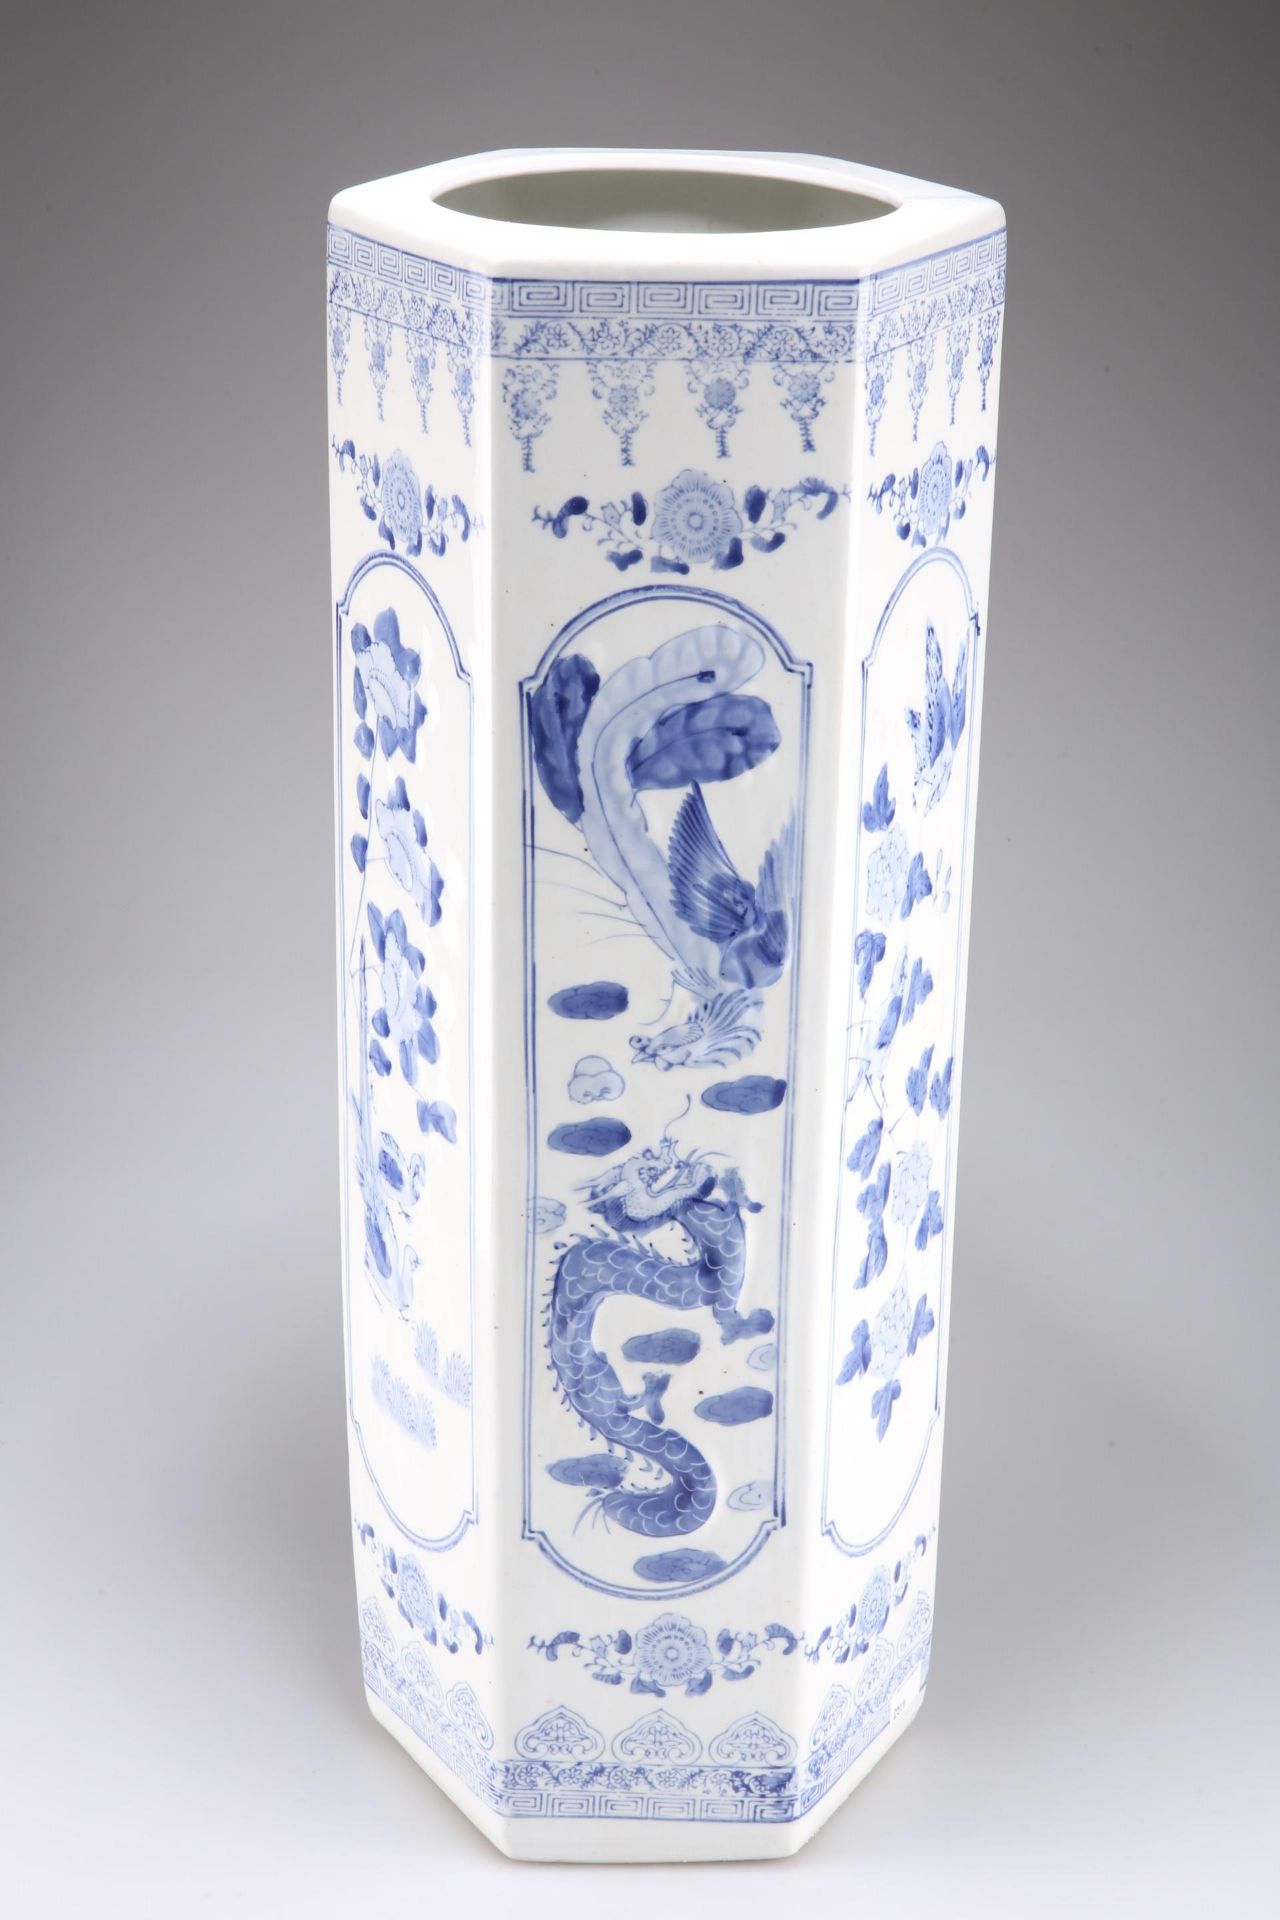 Oriental blue and white stickstand - Image 3 of 7